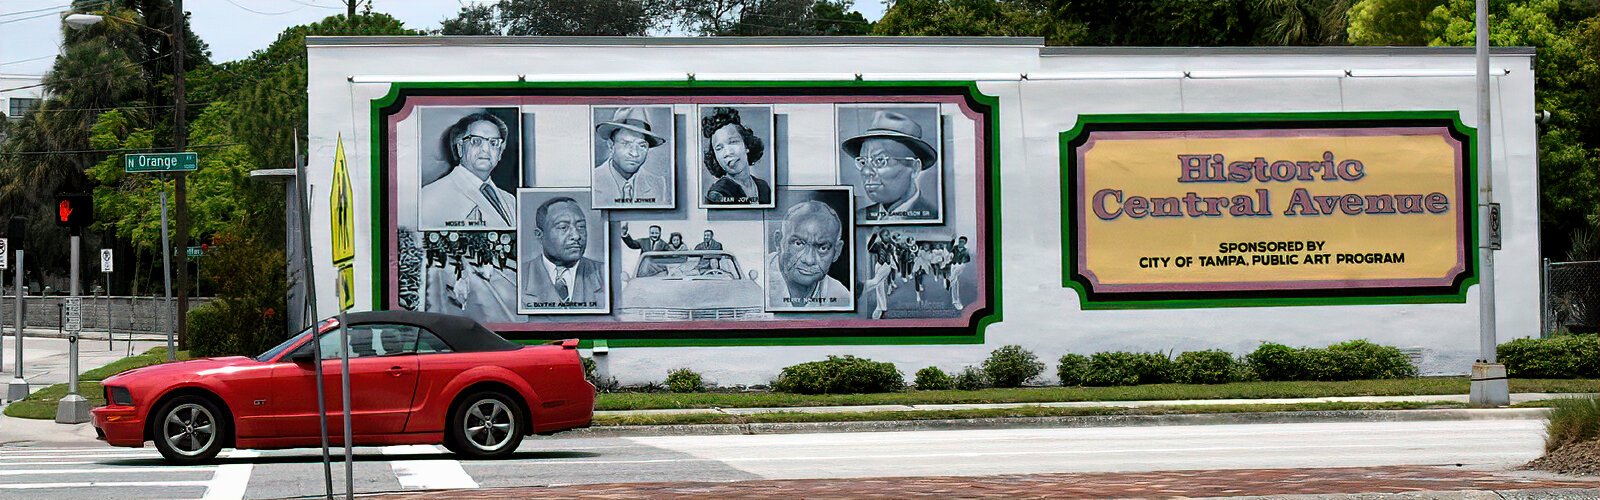 A Tampa Bay History Center walking tour of historic Central Avenue is a history lesson on the "Harlem of the South" and African American life in Tampa from the 1890s to 1960s.